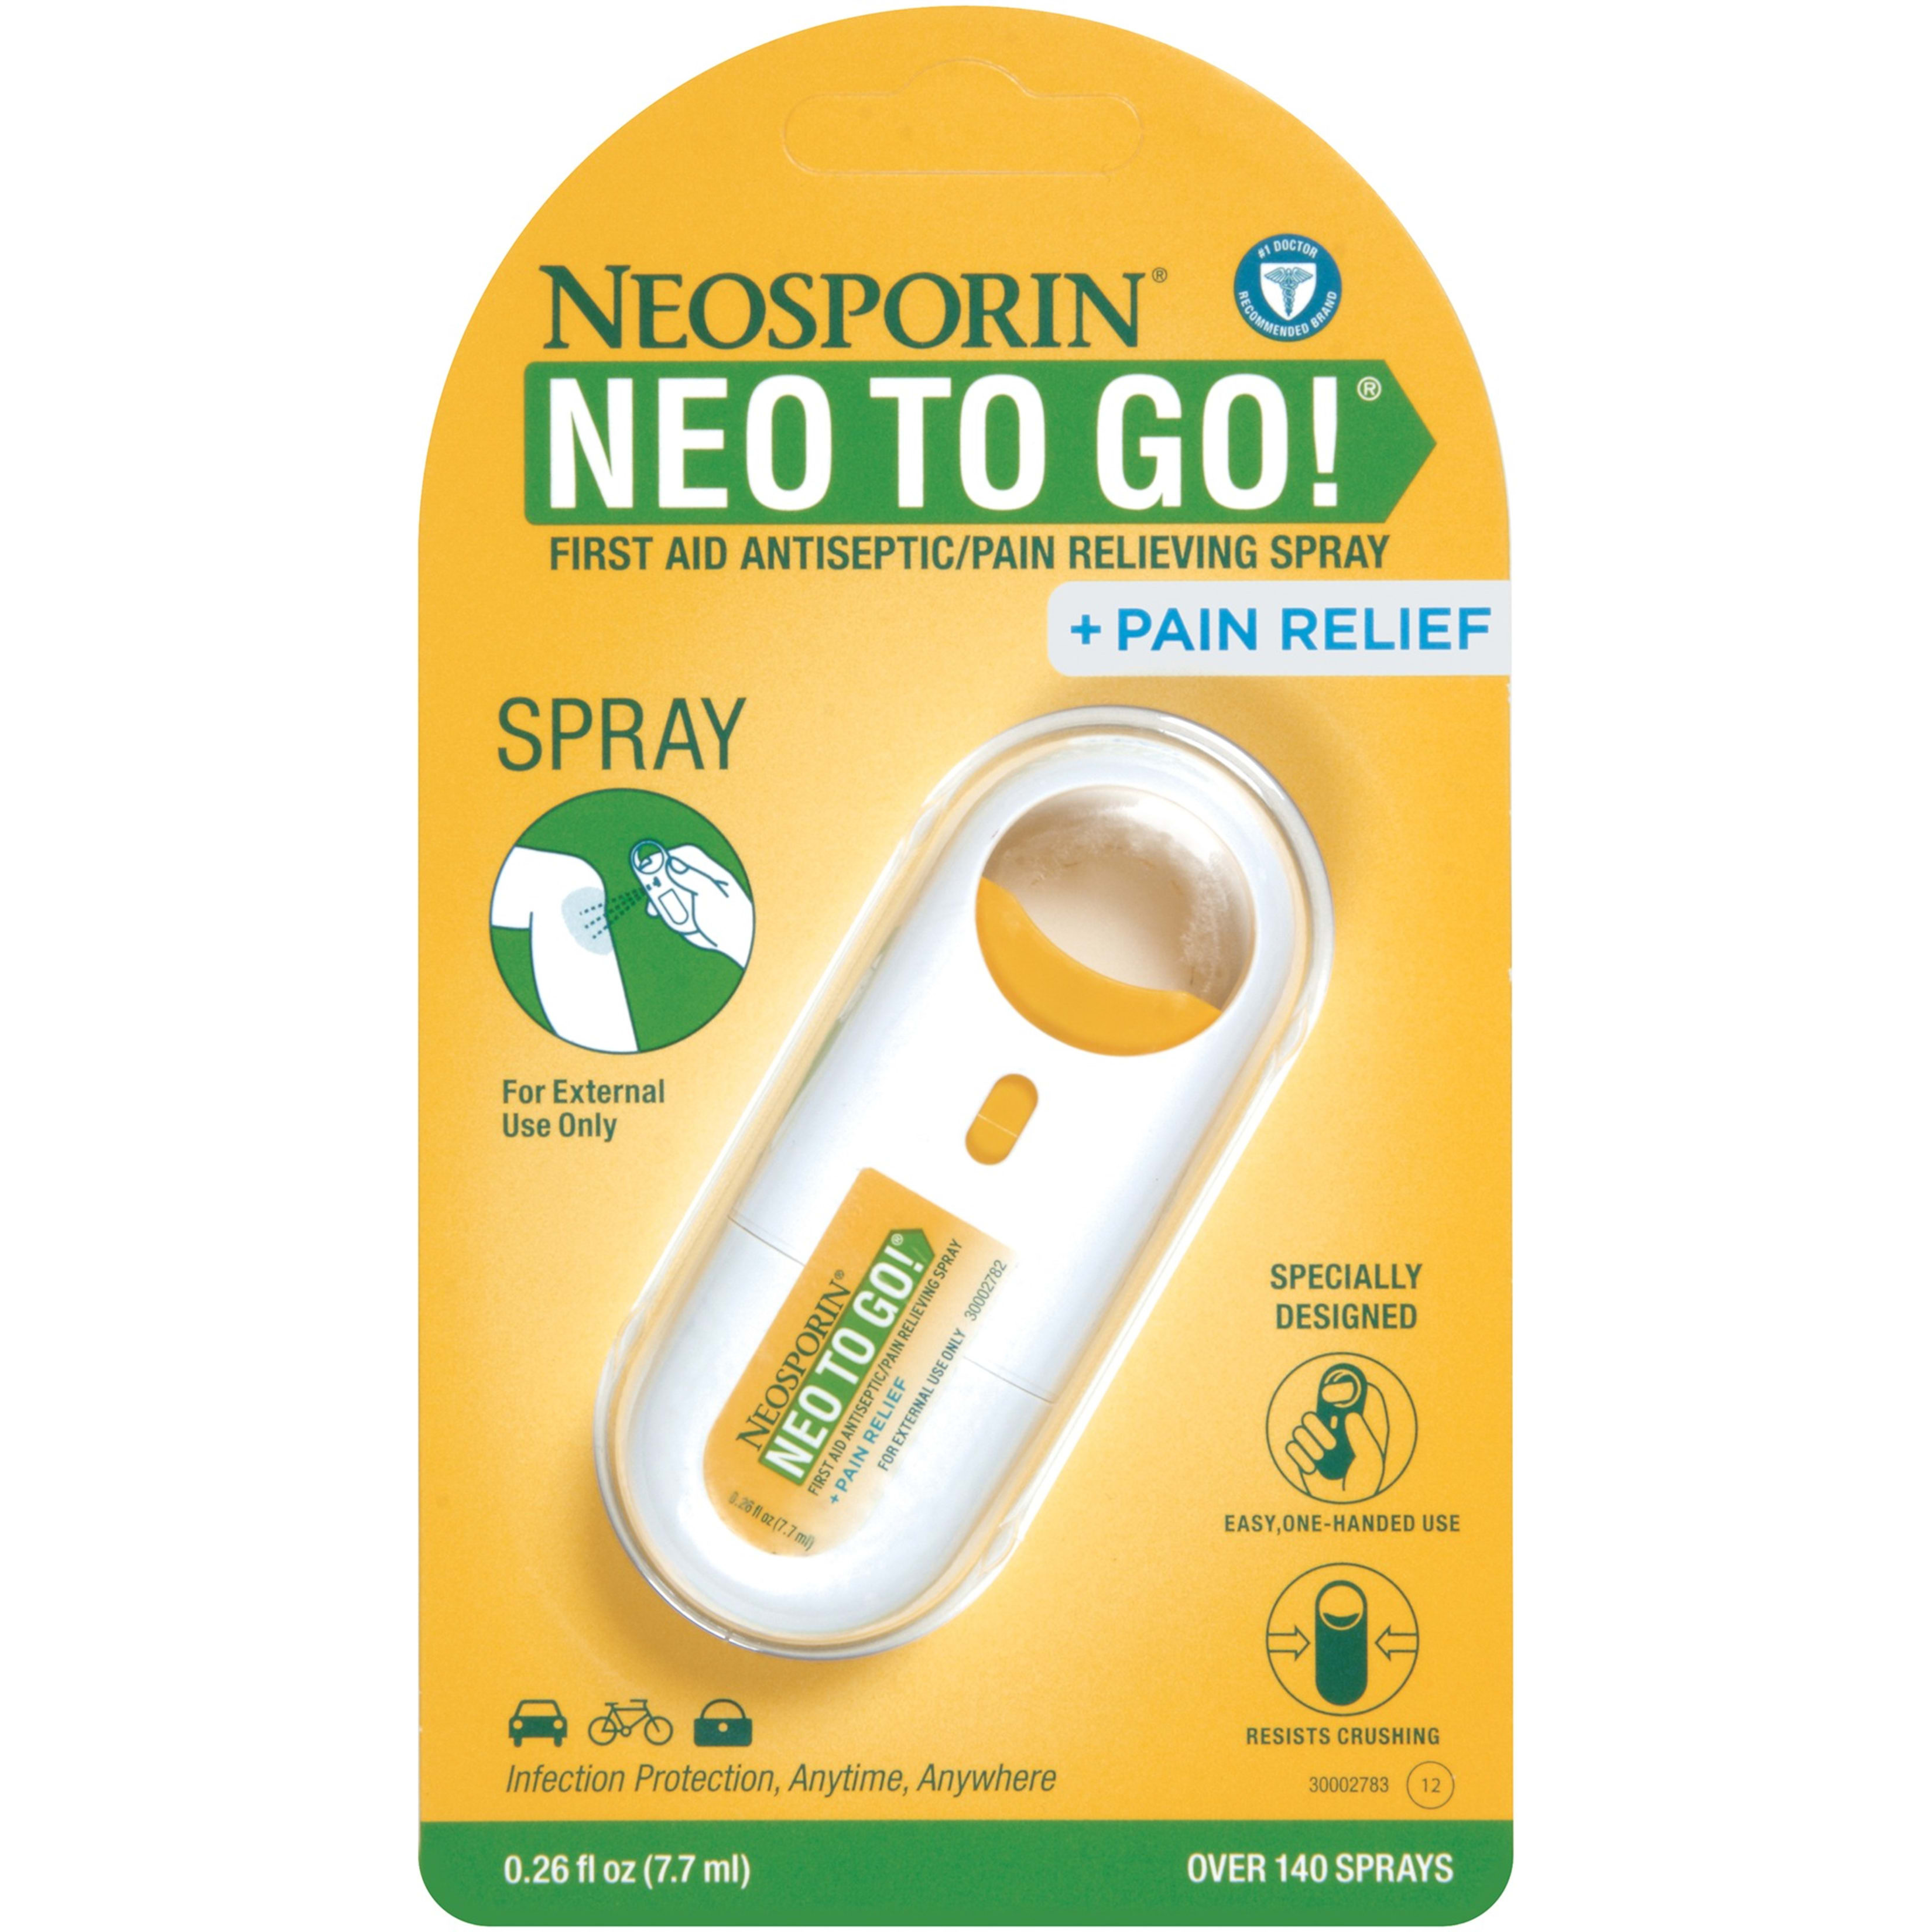 Neosporin + Pain Relief Neo To Go! First Aid Antiseptic/Pain Relieving Spray,.26 Oz - image 1 of 9